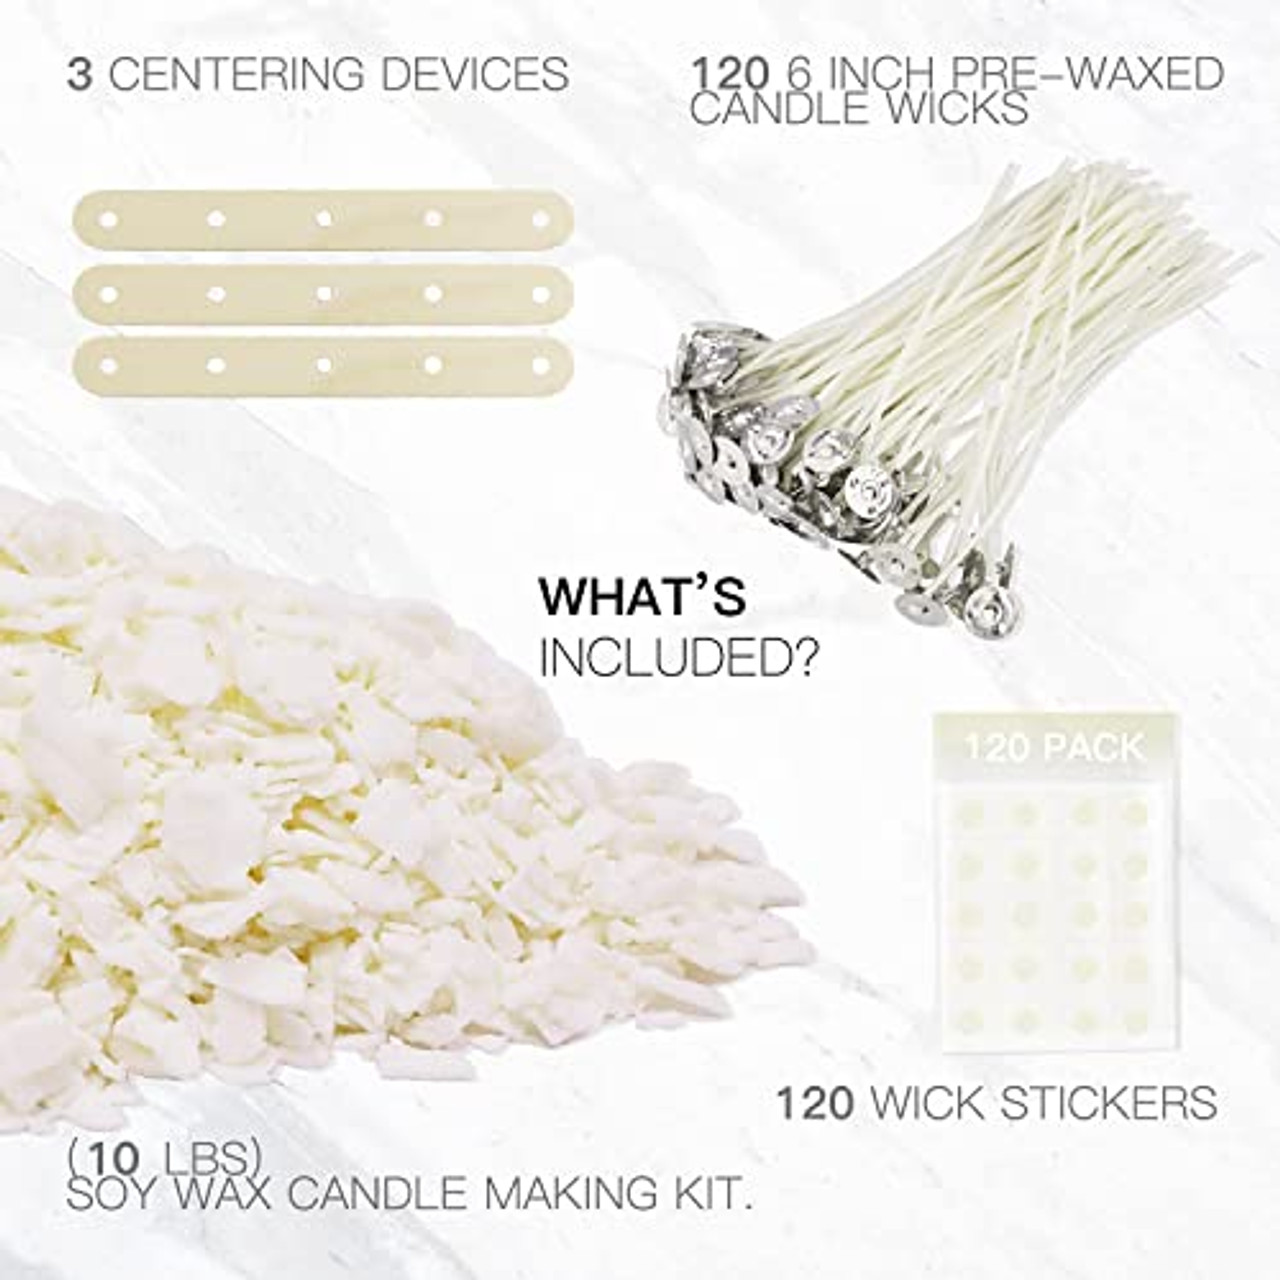 Natural Soy Candle Wax and Candle Making Supplies - 10 lbs Soy Wax for  Candle Making - 100 6-Inch Pre-Waxed Candle Wicks - 2 Metal Centering  Devices - 10 Pounds Soy Wax Flakes